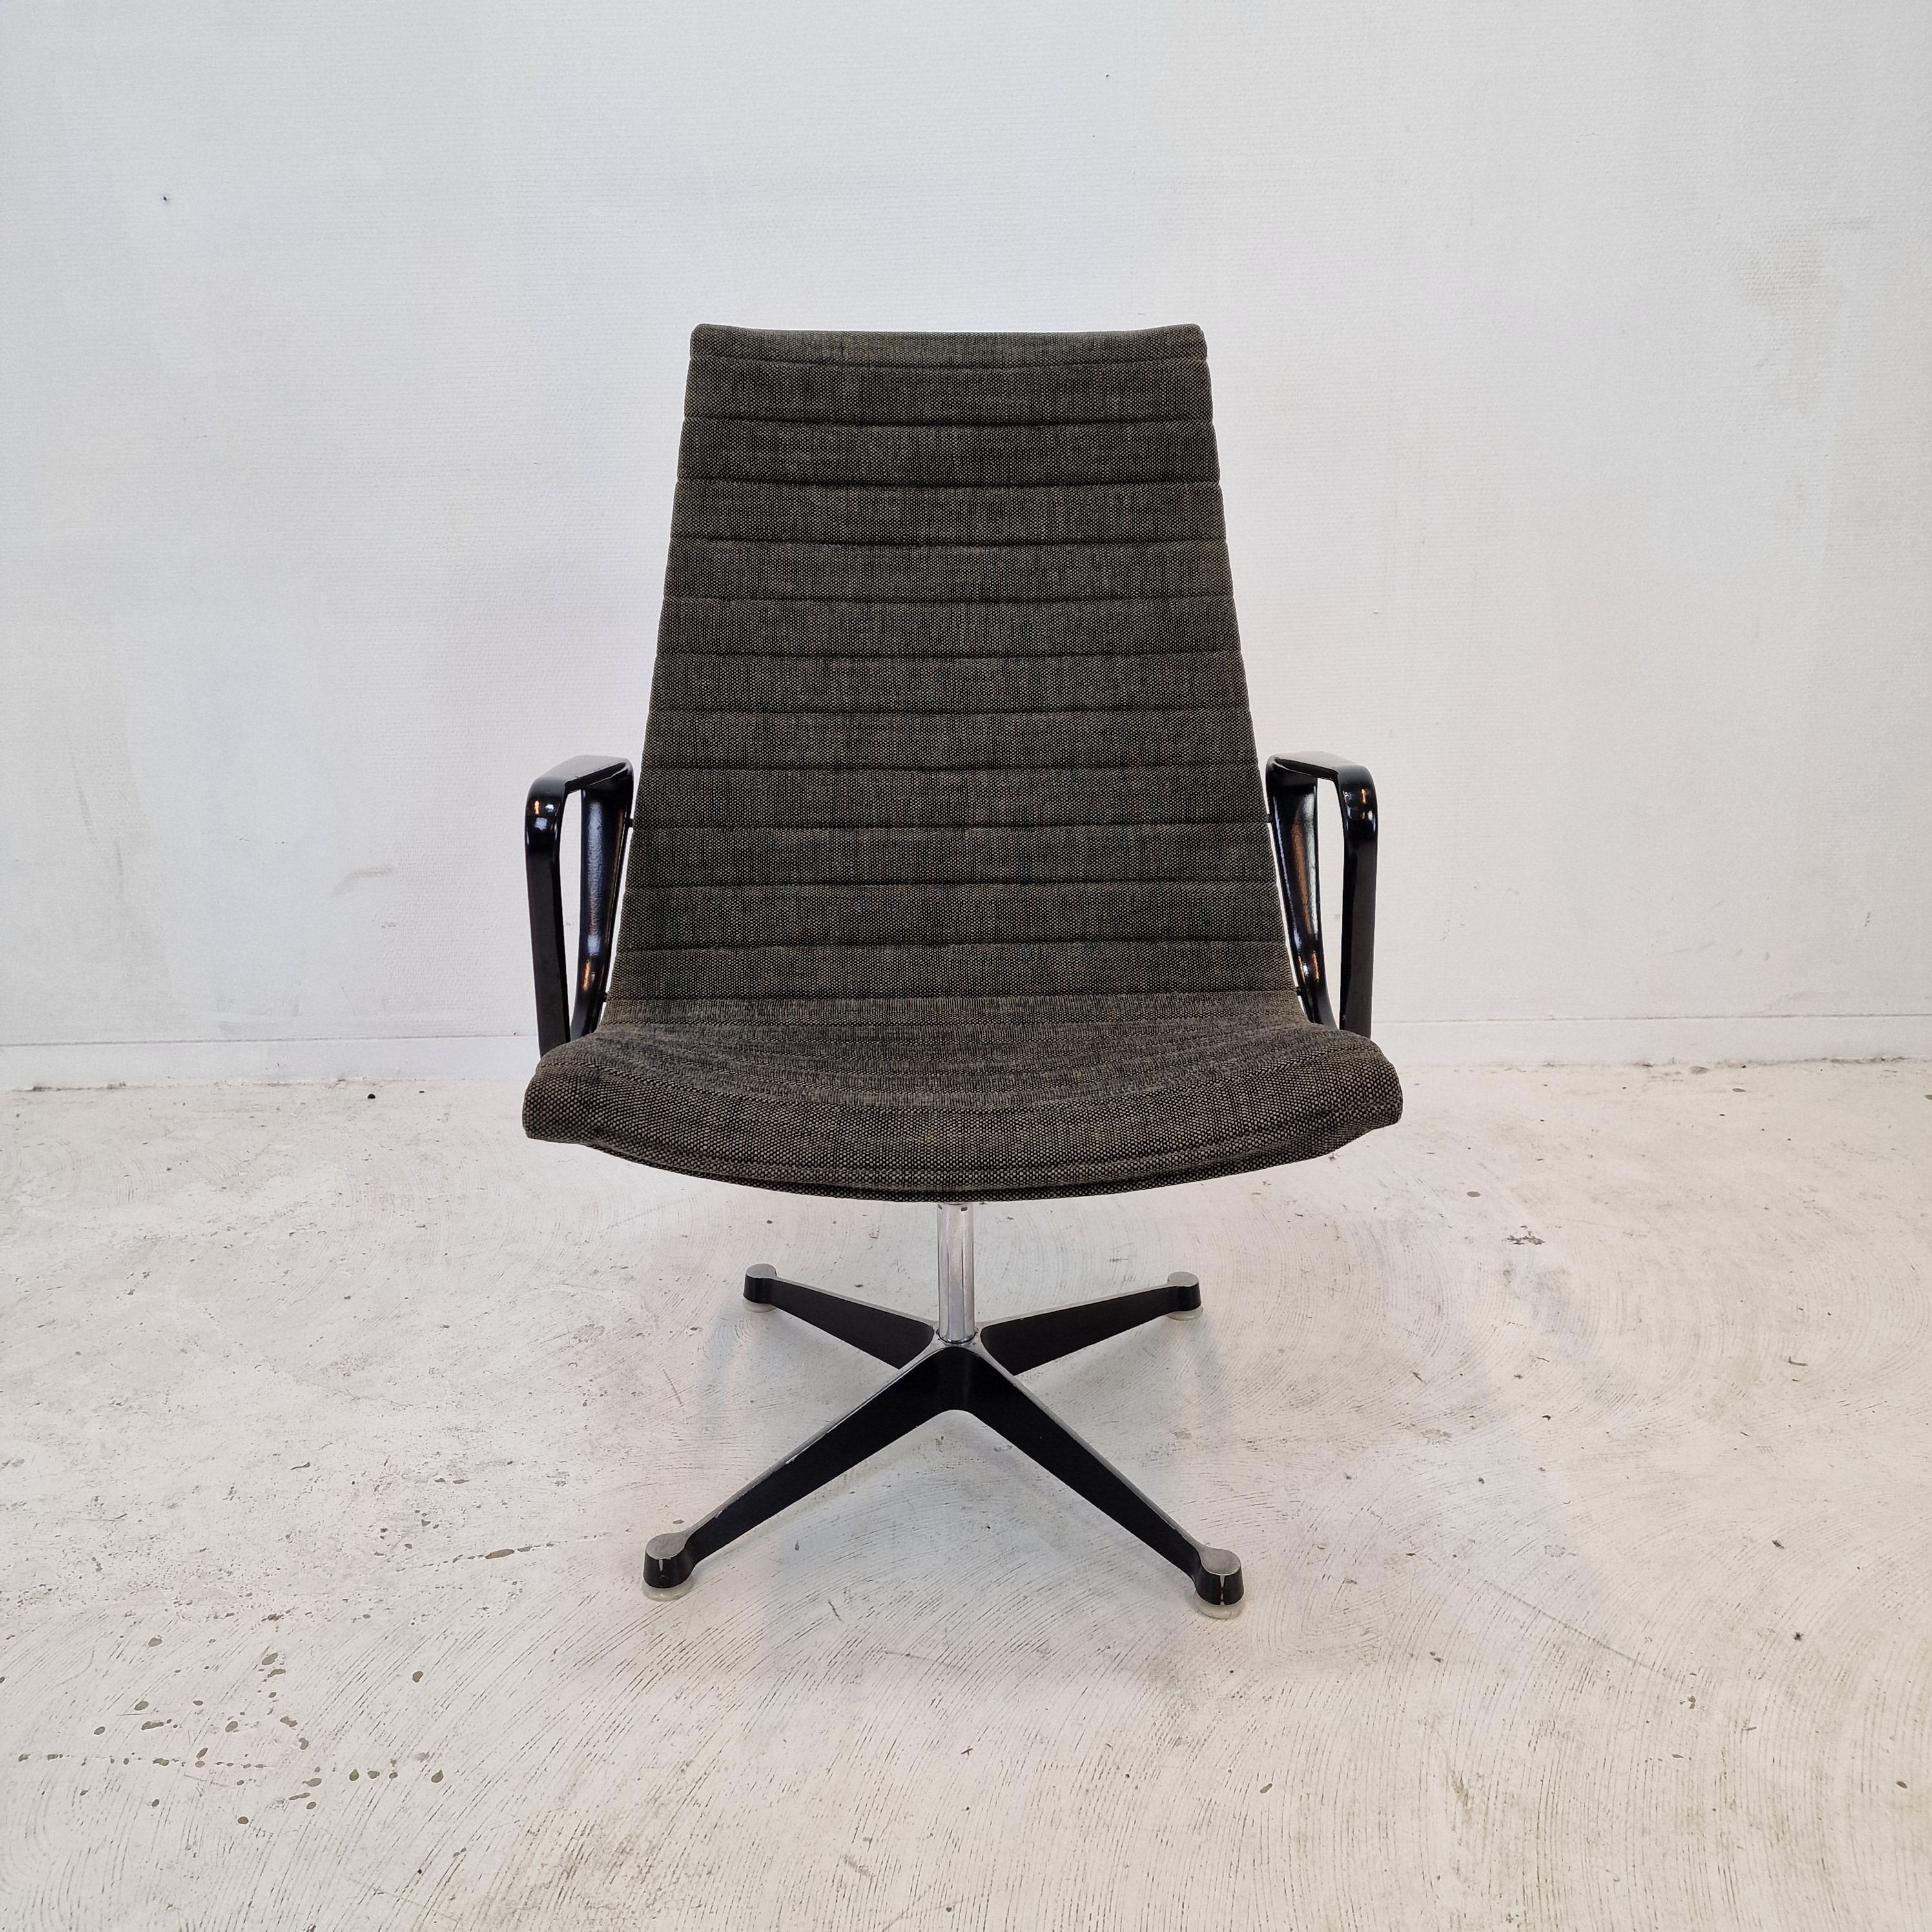 Very nice original EA116 Chairs, early edition.
These swivel chairs are designed by Charles and Ray Eames and fabricated by Herman Miller in the 60's.

They have the original grey 